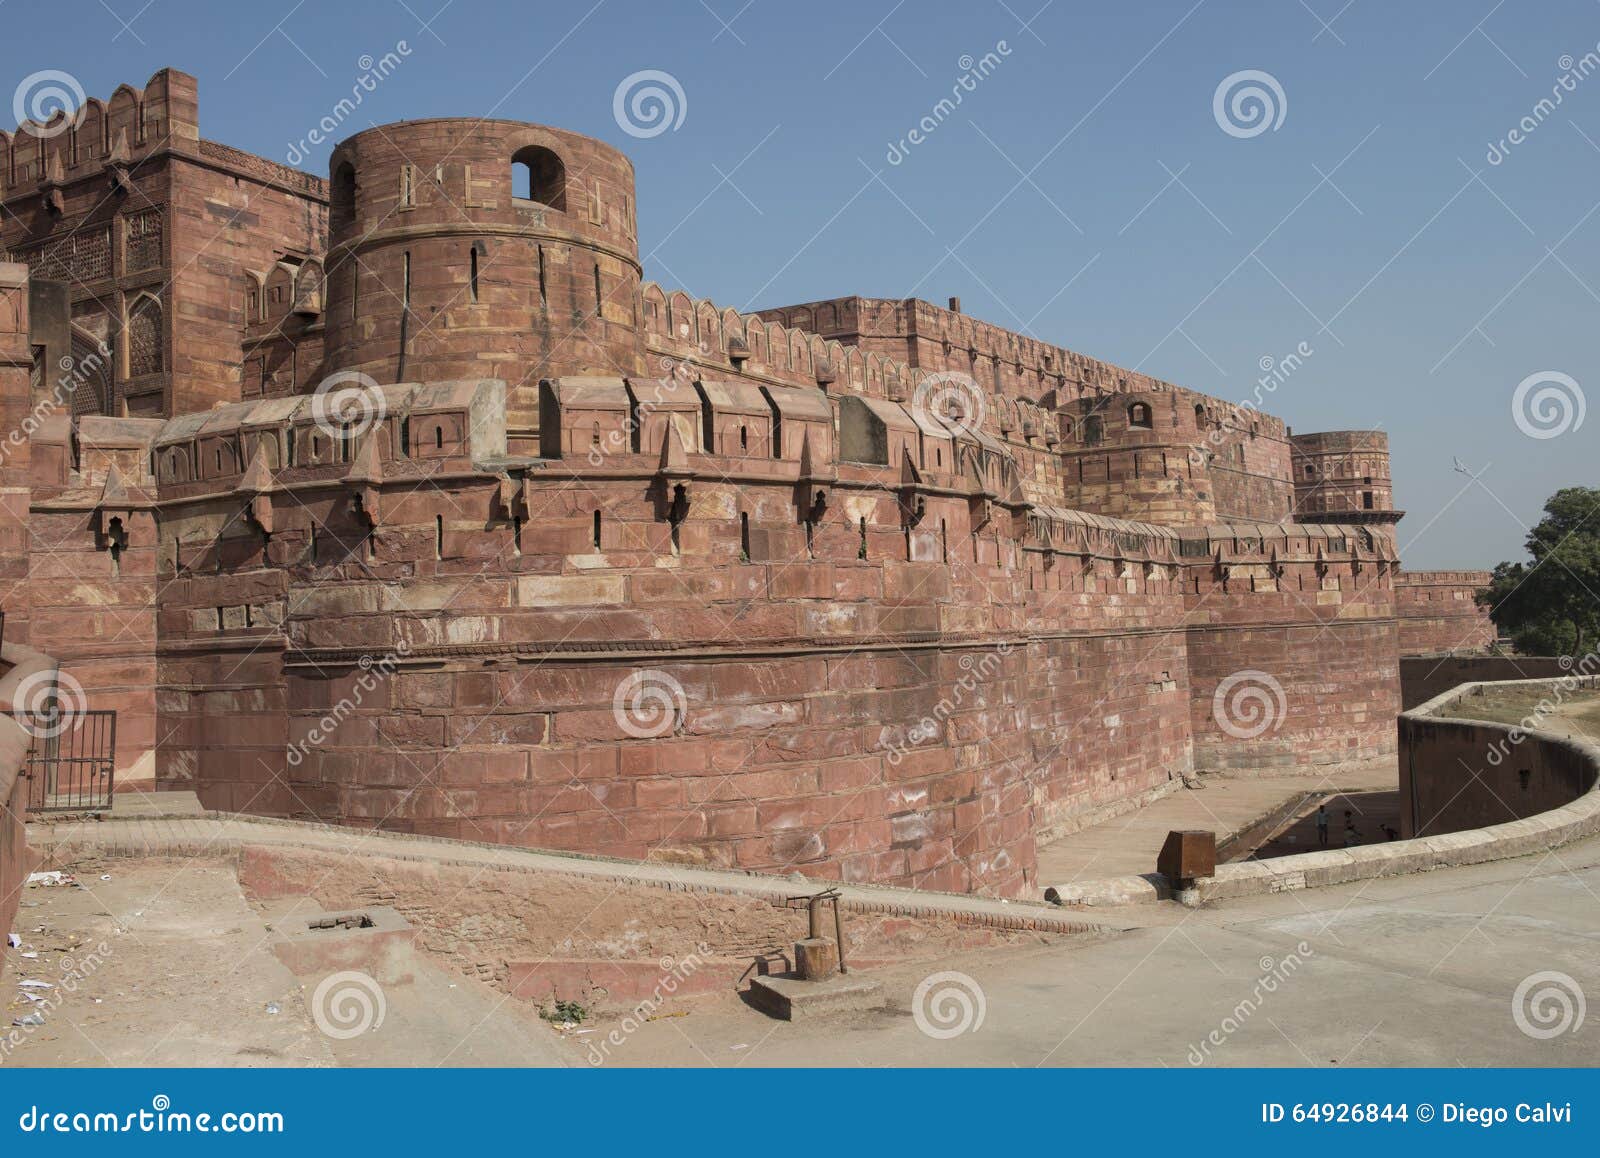 red fort of agra, india